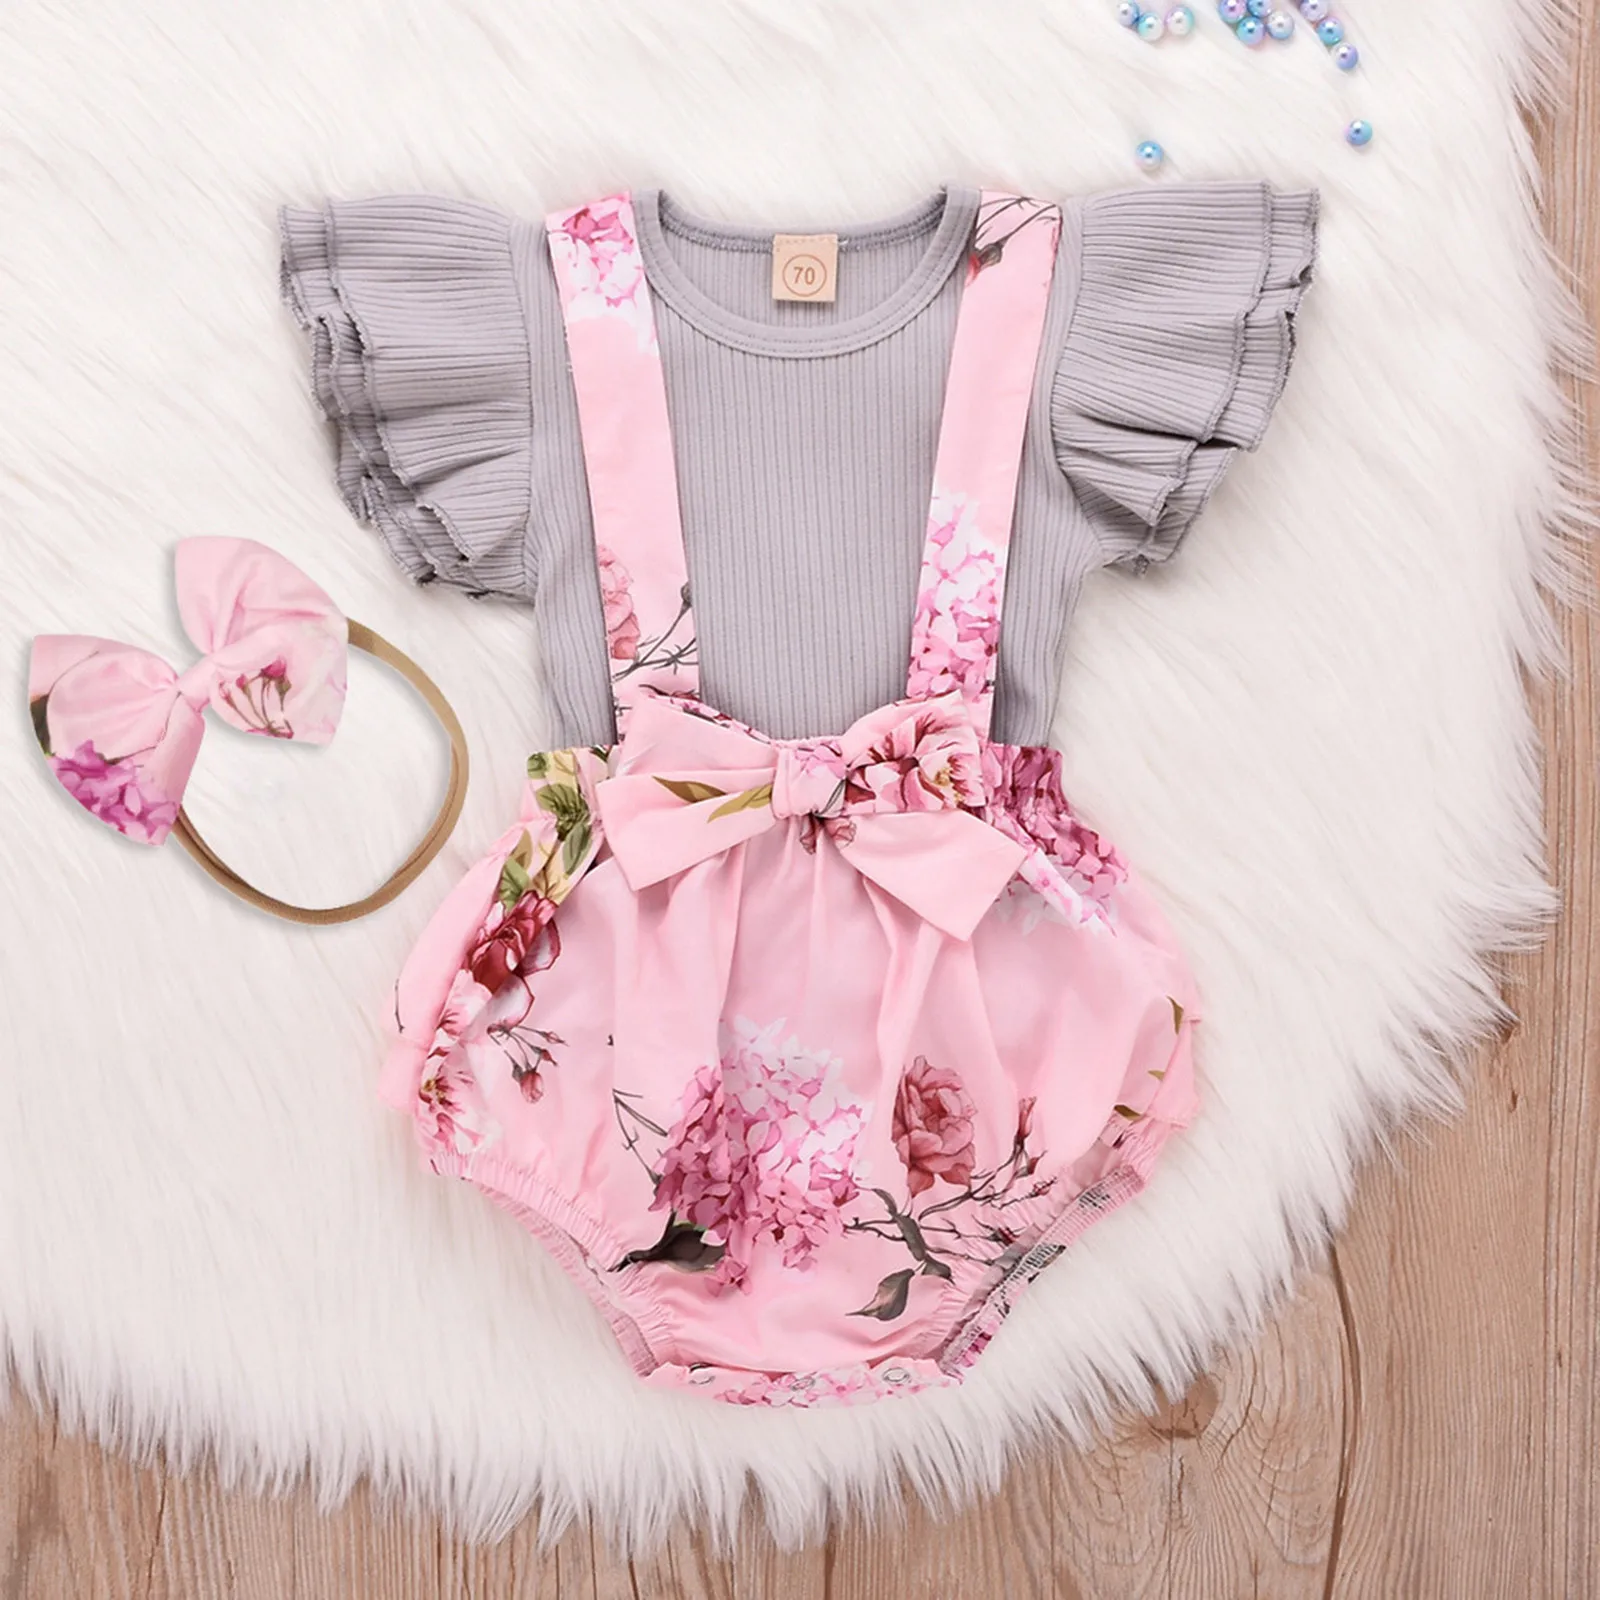 Toddler Infant Baby Girl Clothes Floral Print Bow Suspender Skirt Princess Dress Fly Sleeve Ruffled Romper Outfits 2pcs 0m-24m